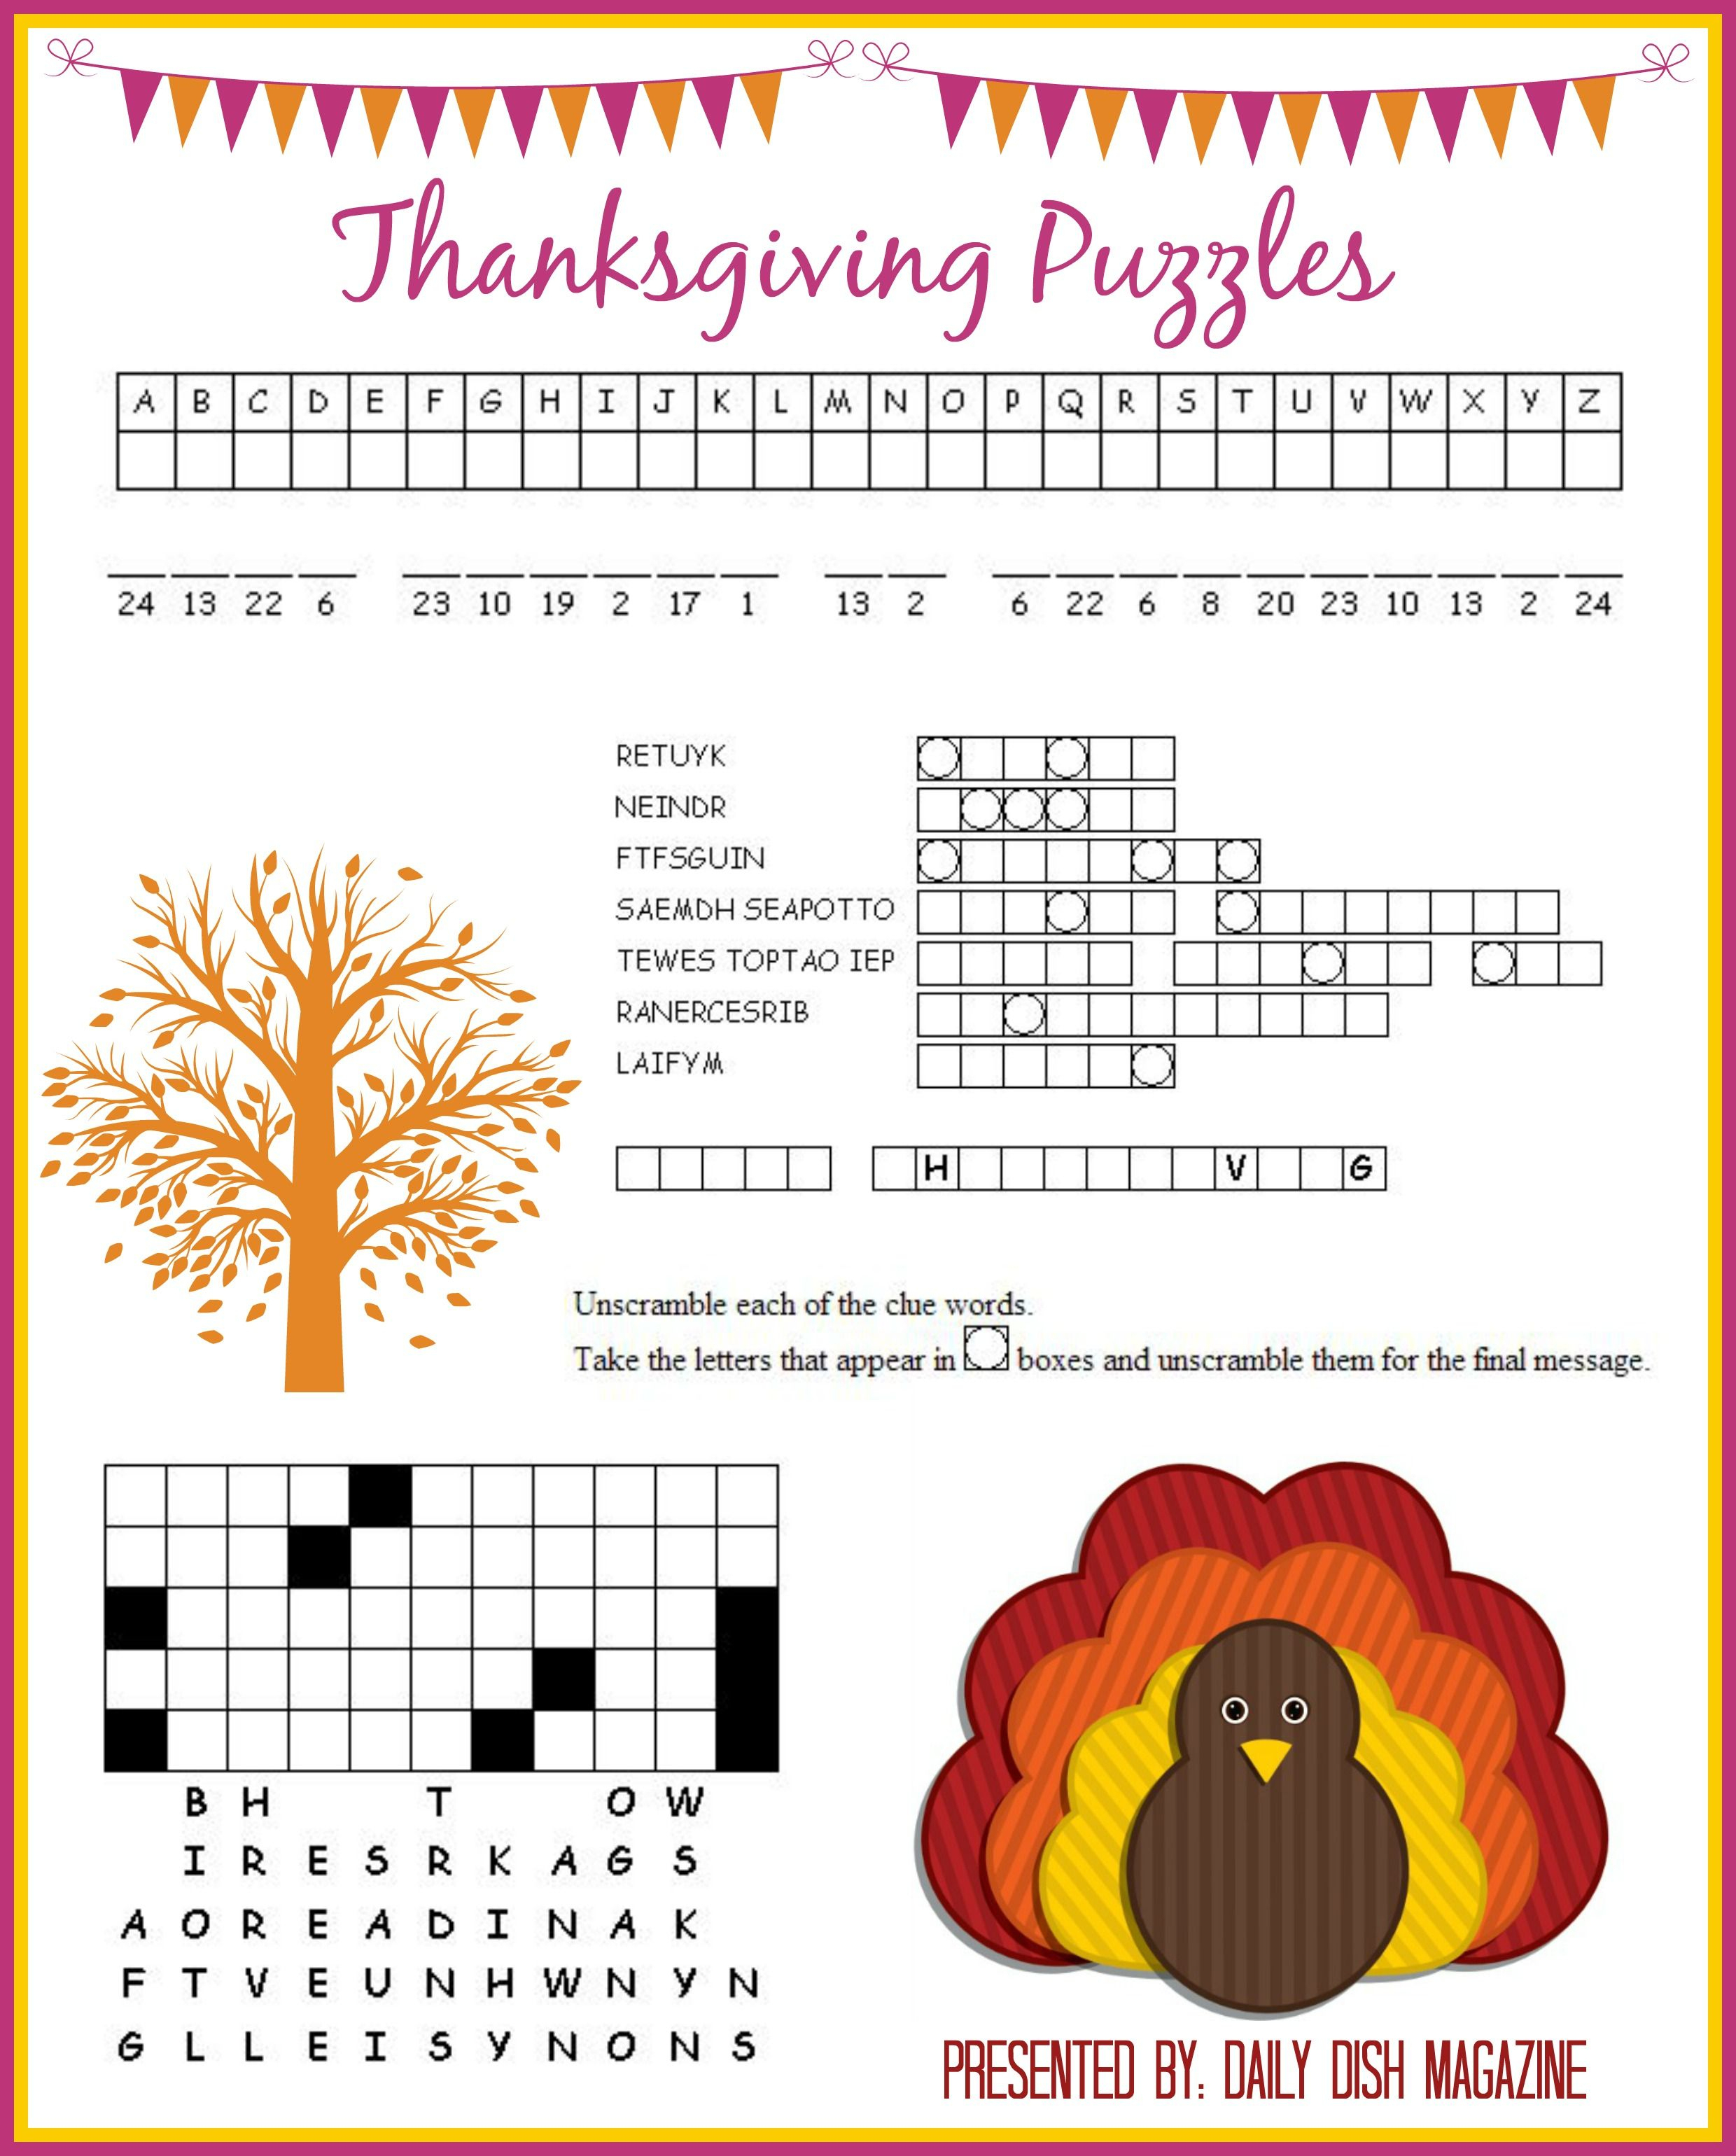 Thanksgiving Puzzles Printables | *holidays We Celebrate - Thanksgiving Crossword Puzzle Printable